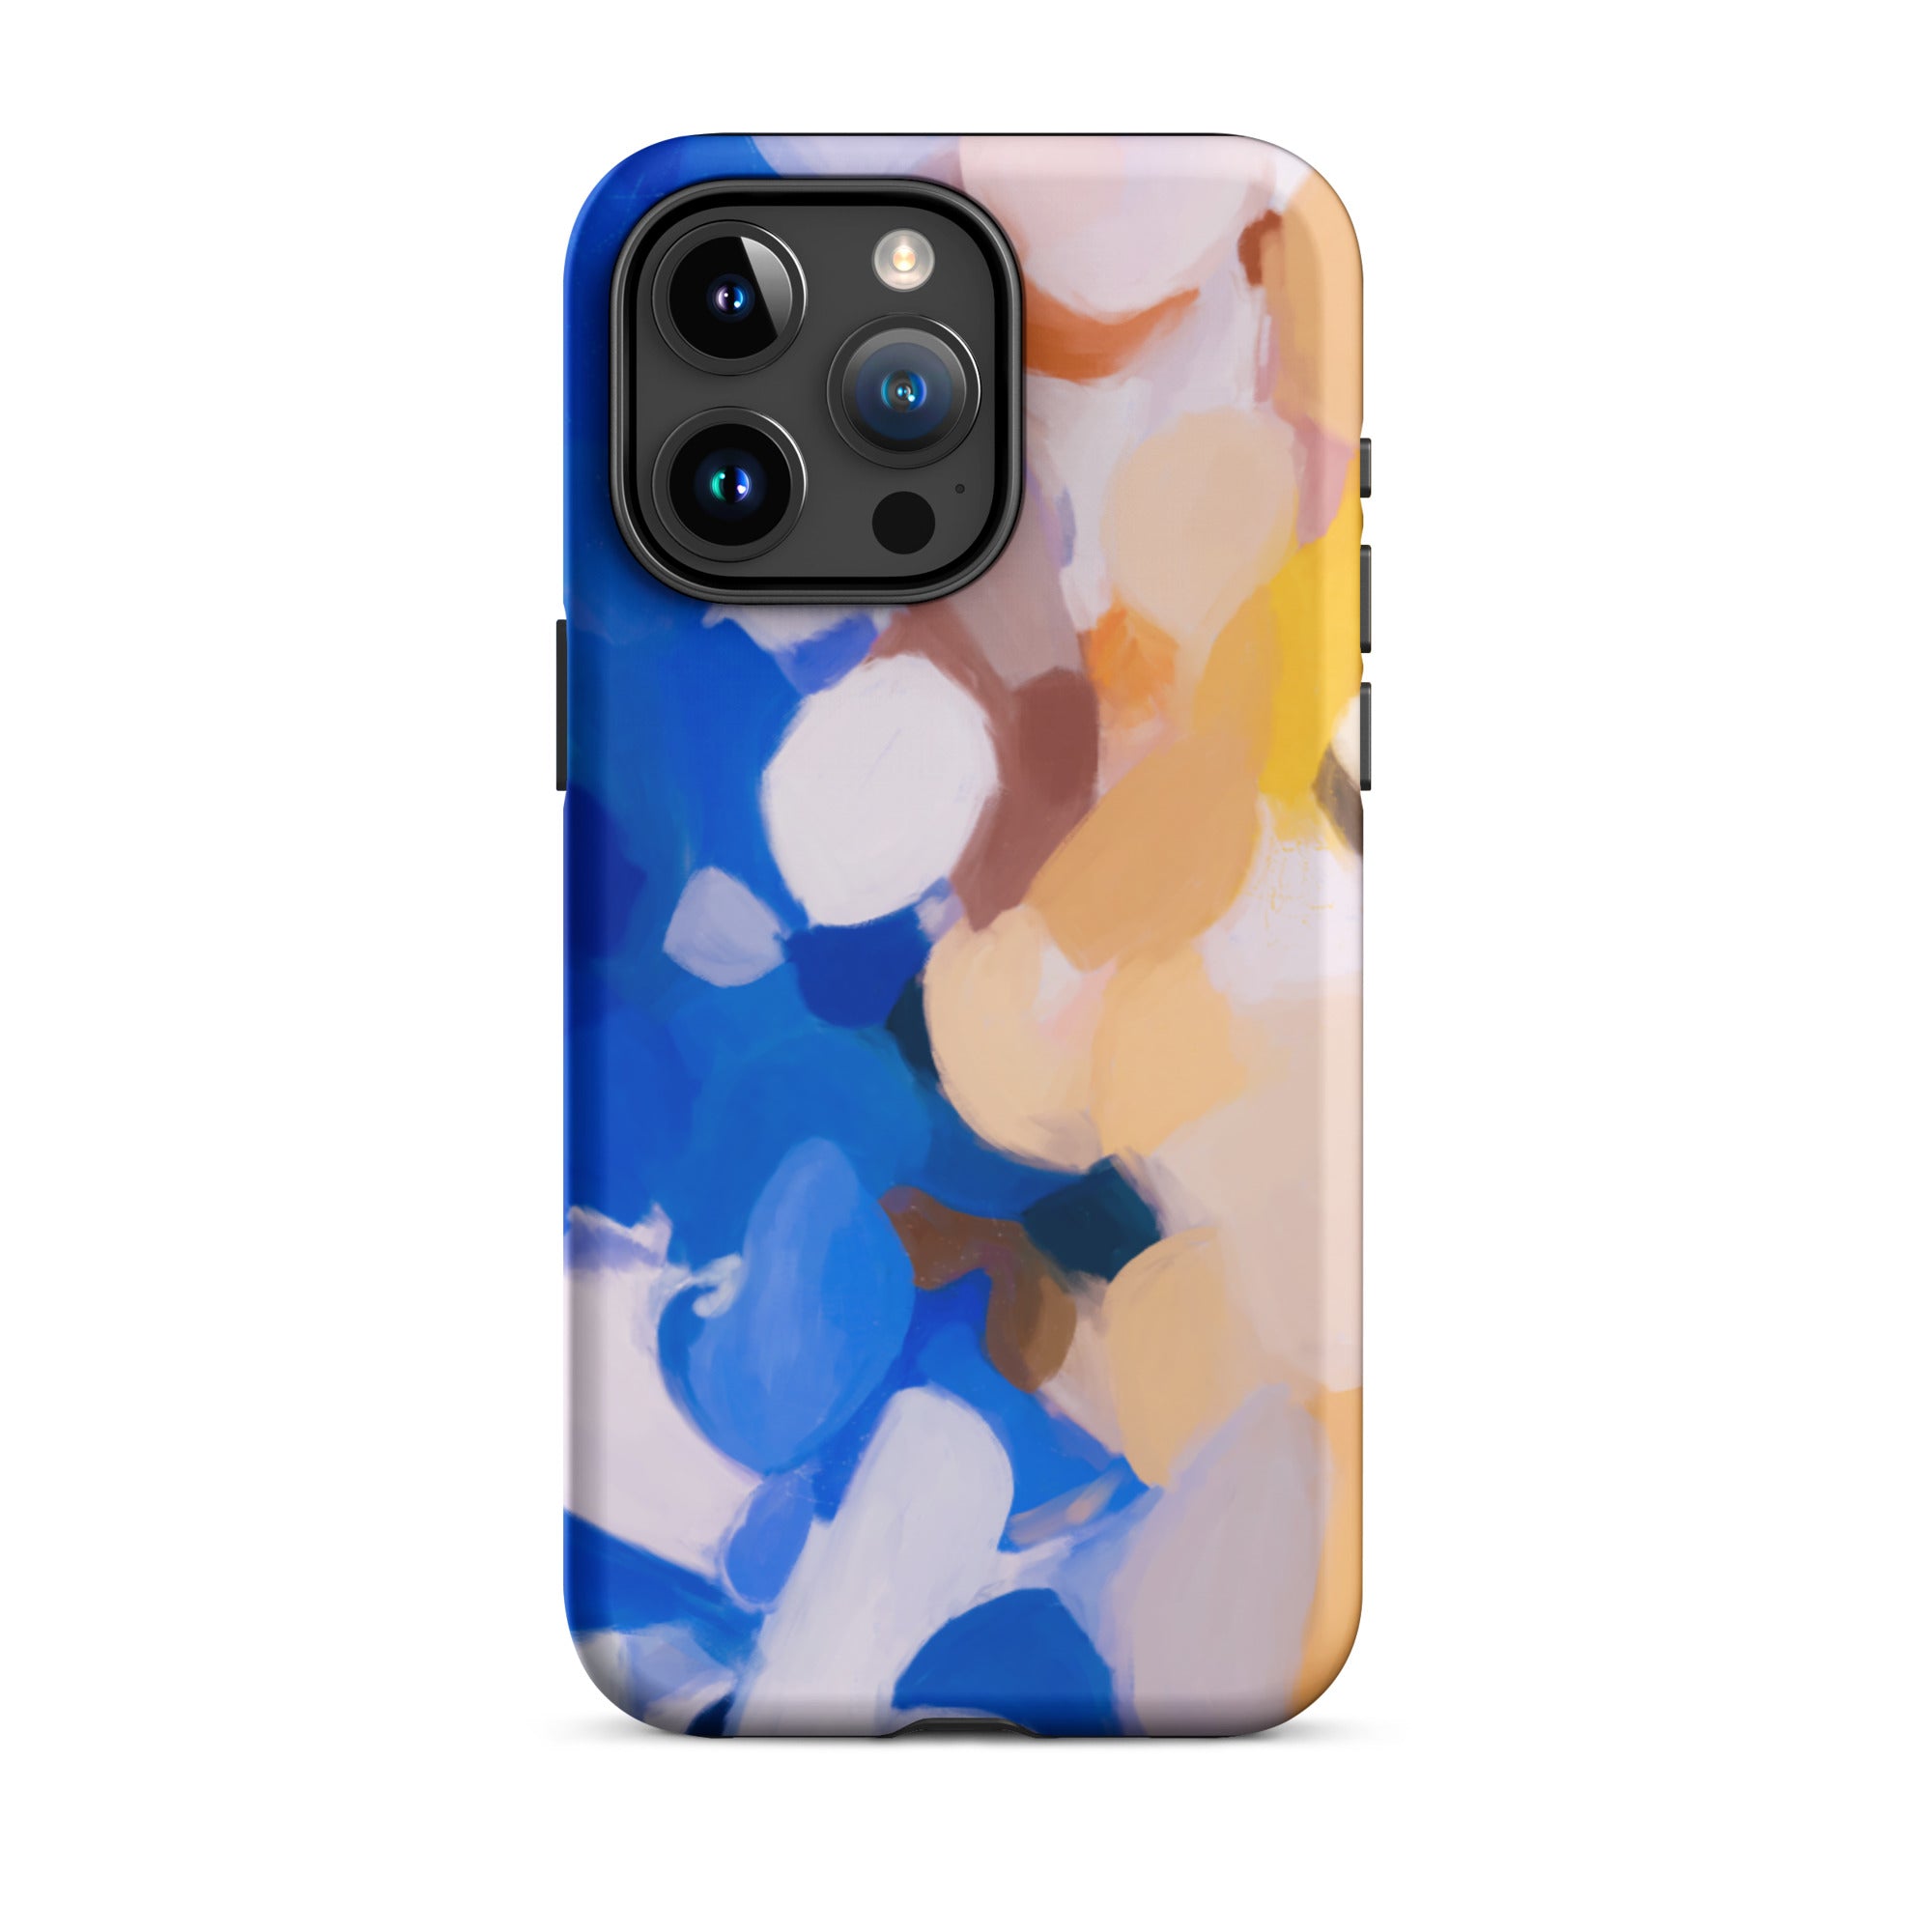 Bluebell, blue and yellow abstract art - iPhone 15 Pro Max tough case by Parima Studio